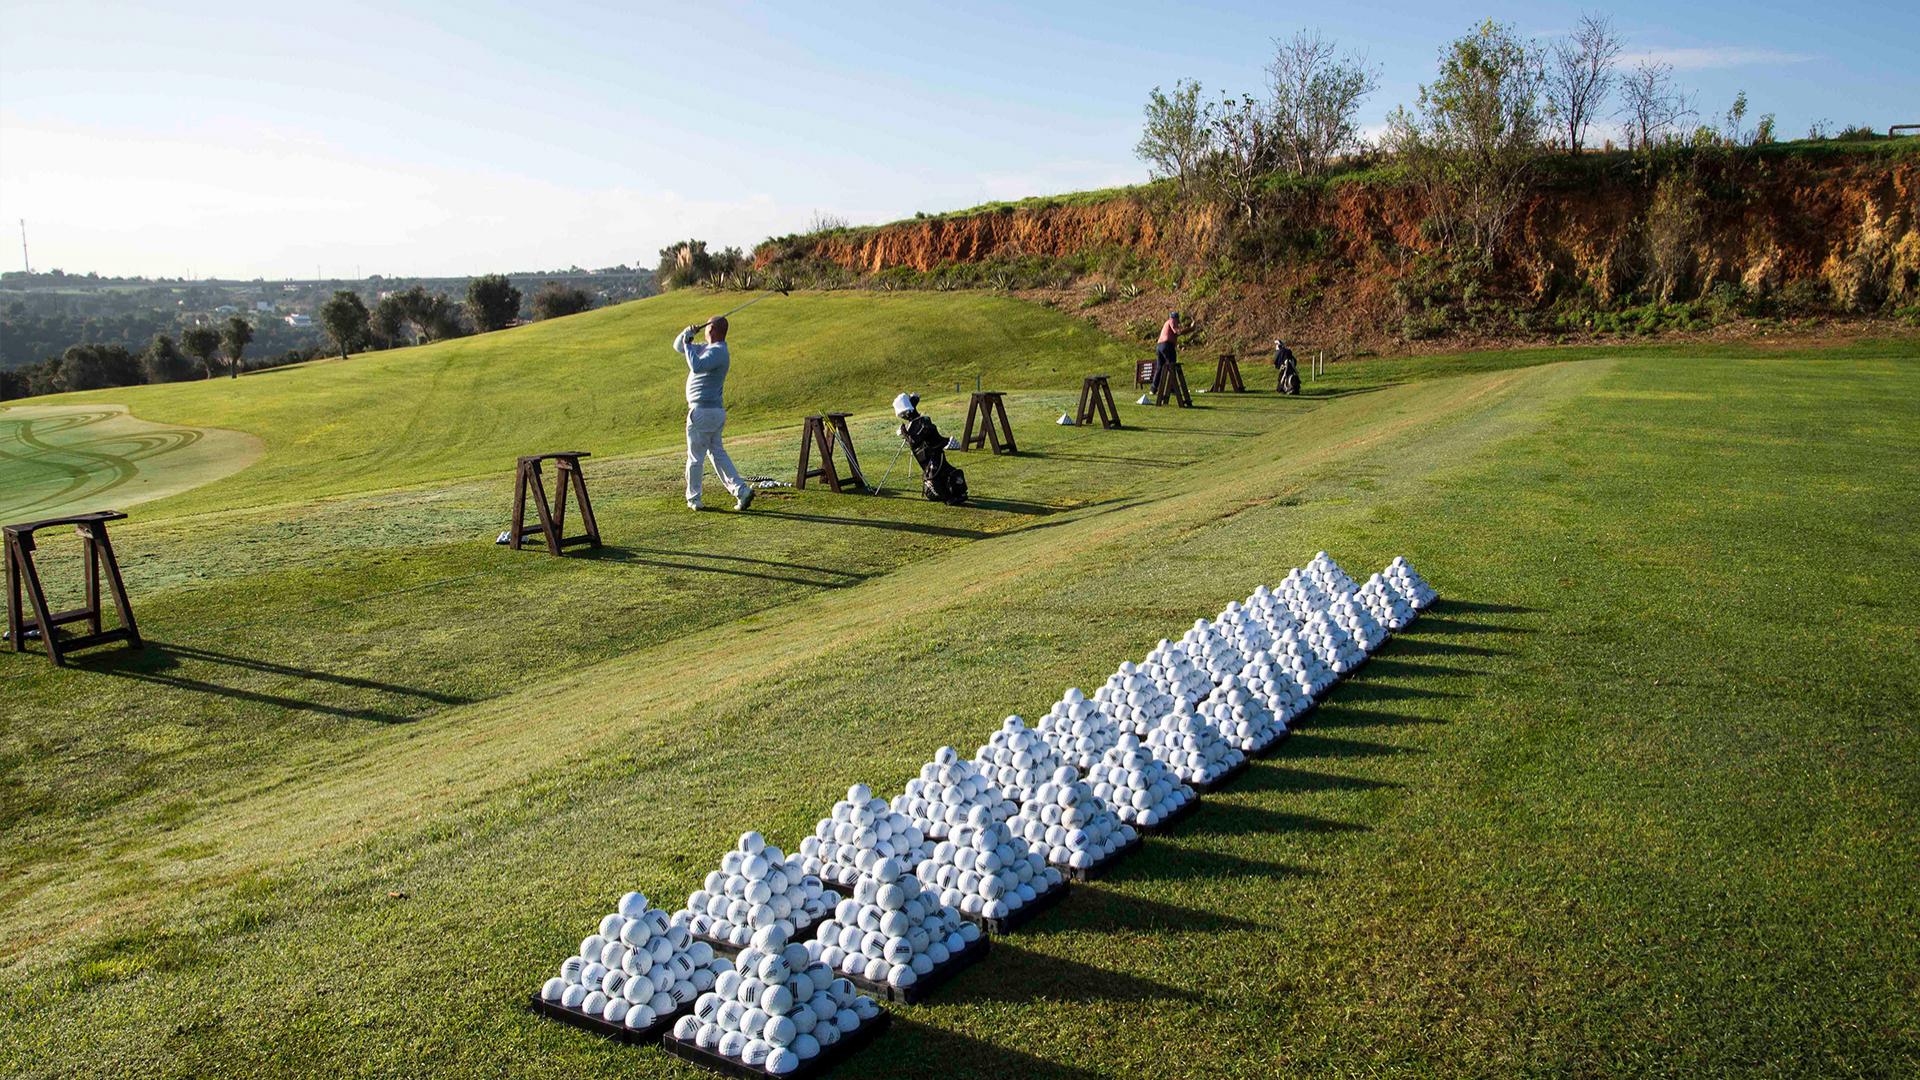 Play golf in the future, in the Algarve!